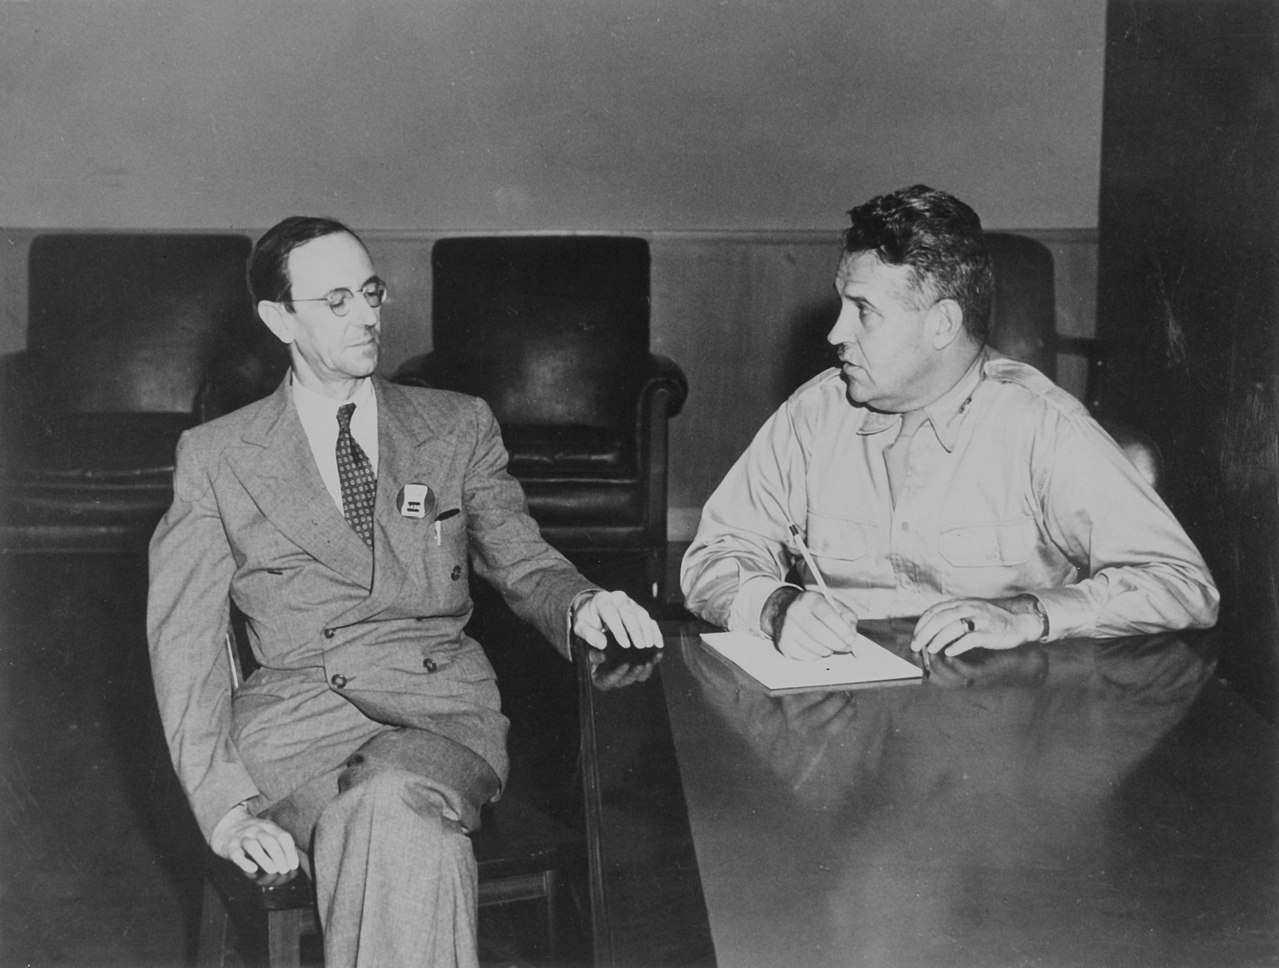 Chadwick (left) with Major General Leslie R. Groves, Jr., the director of the Manhattan Project